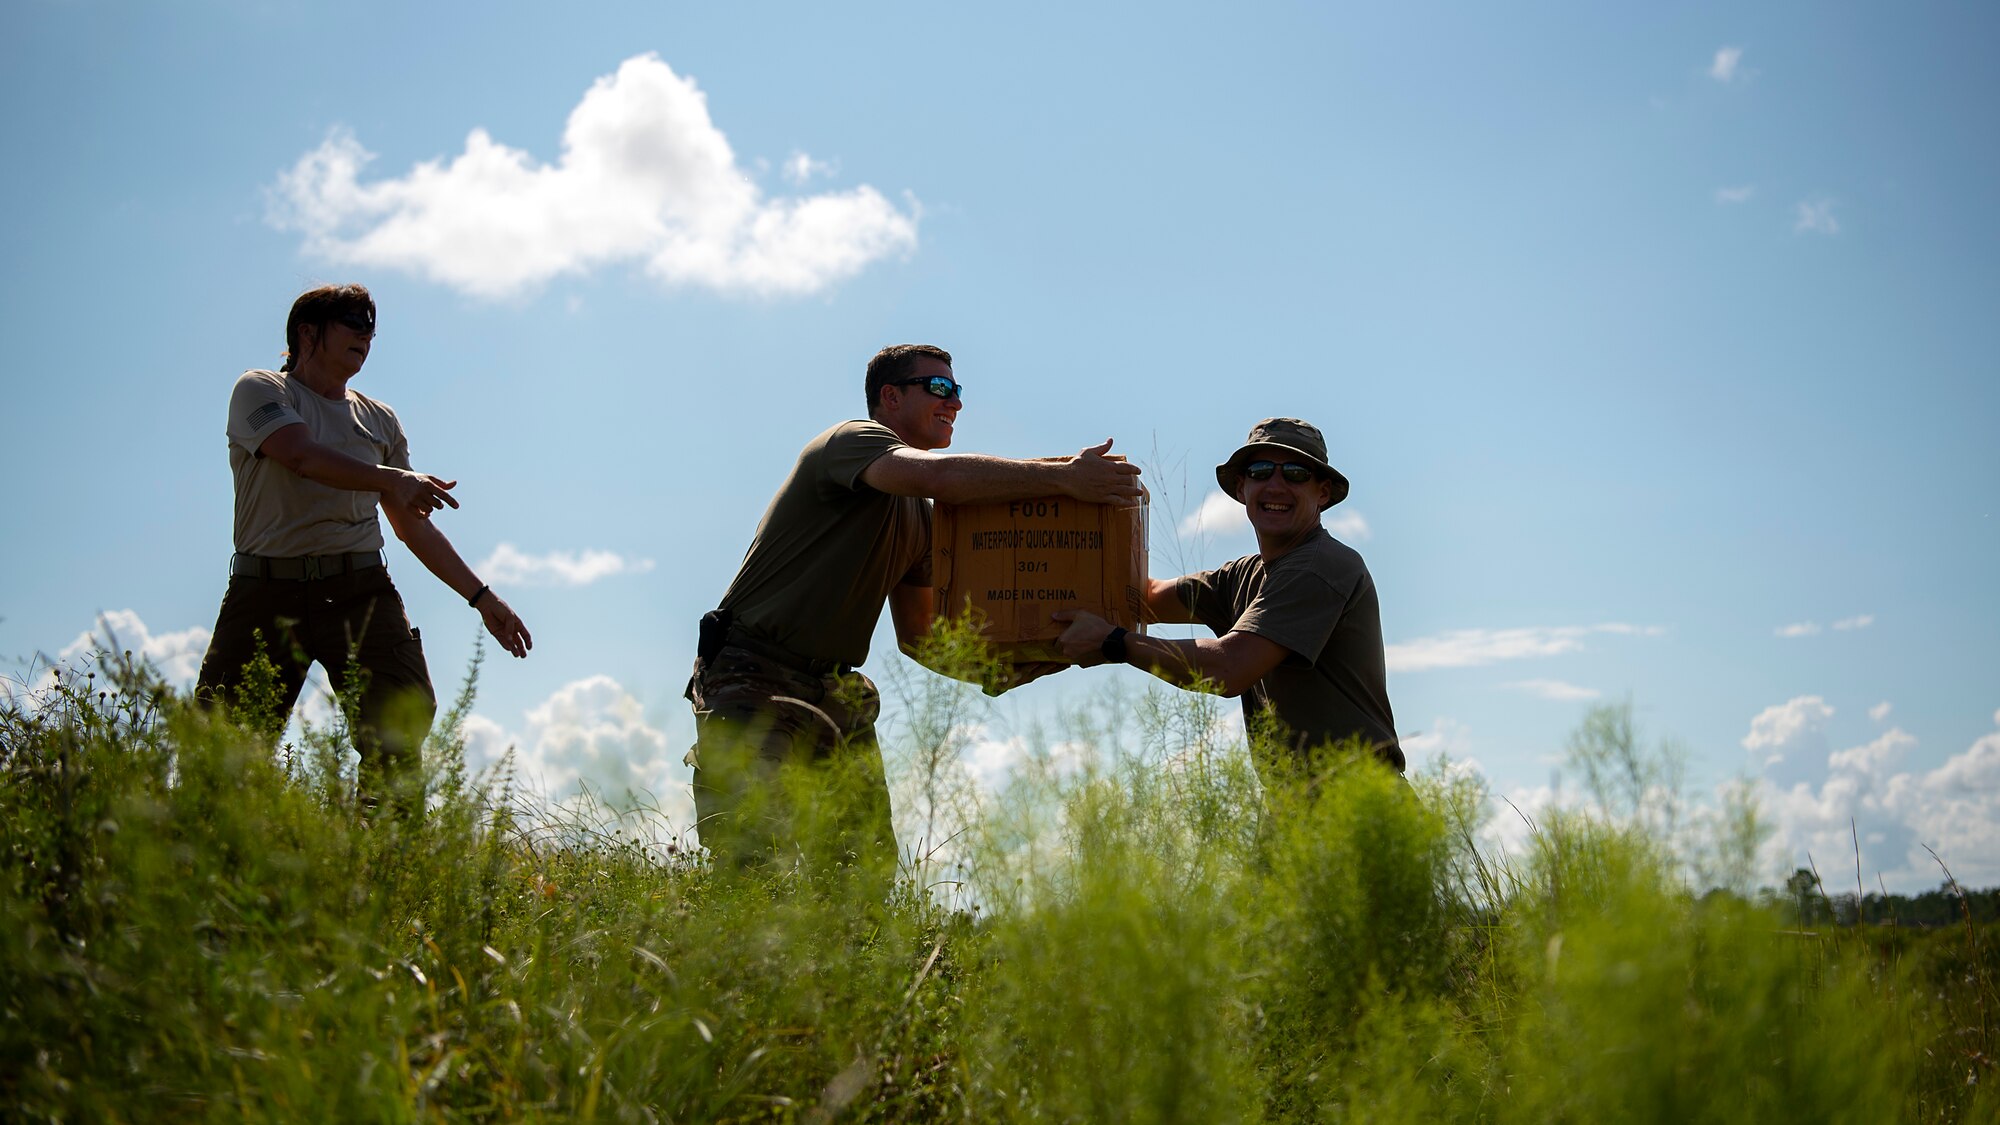 U.S. Air Force Staff Sgt. Benjamin McGovern (right), NCO in charge of explosive ordnance disposal operations assigned to the 6rh Civil Engineer Squadron, hands a box of explosives to U.S. Air Force Tech. Sgt. Michael Sweeney, NCO in charge of EOD quality assurance assigned to the 6th CES, during a joint disposal procedure at the Avon Park Air Force Range, Fla., Sept. 9, 2019. Federal, state and local authorities partnered to dispose of over 7,000 pounds of evidence following the conclusion of a federal case.